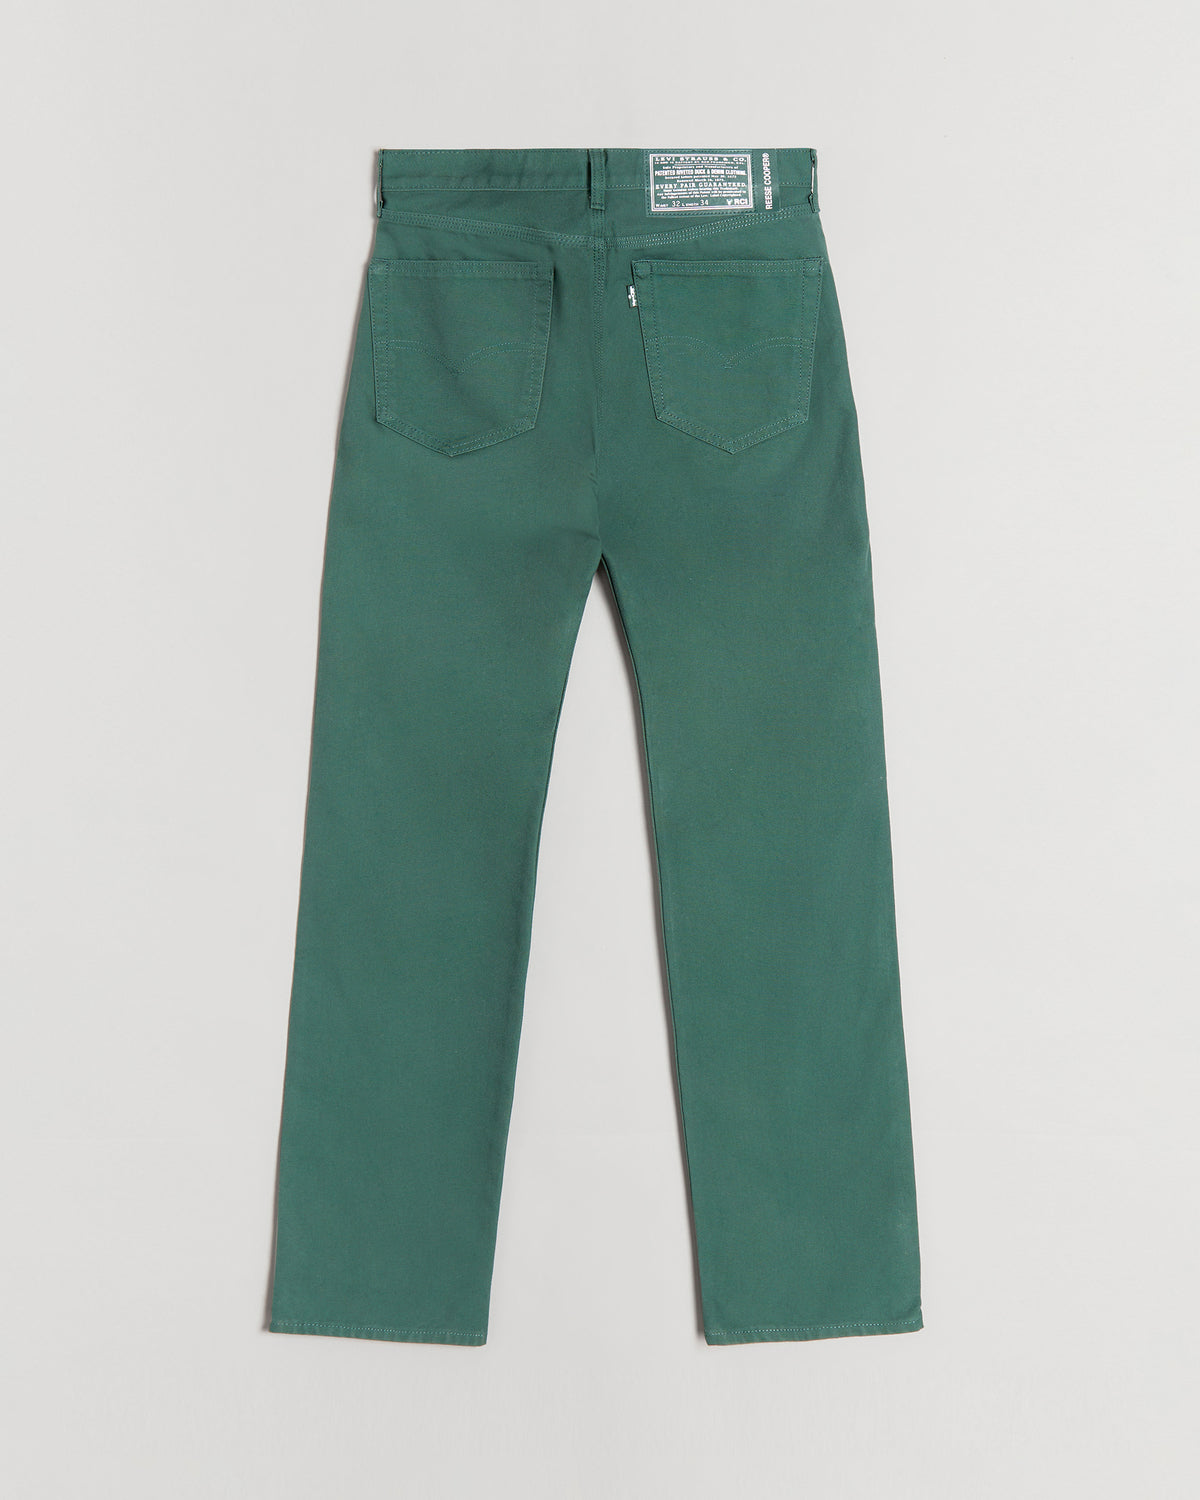 RCI x Levi's Straight Fit Duck Canvas Pant in Forest Green – REESE COOPER®